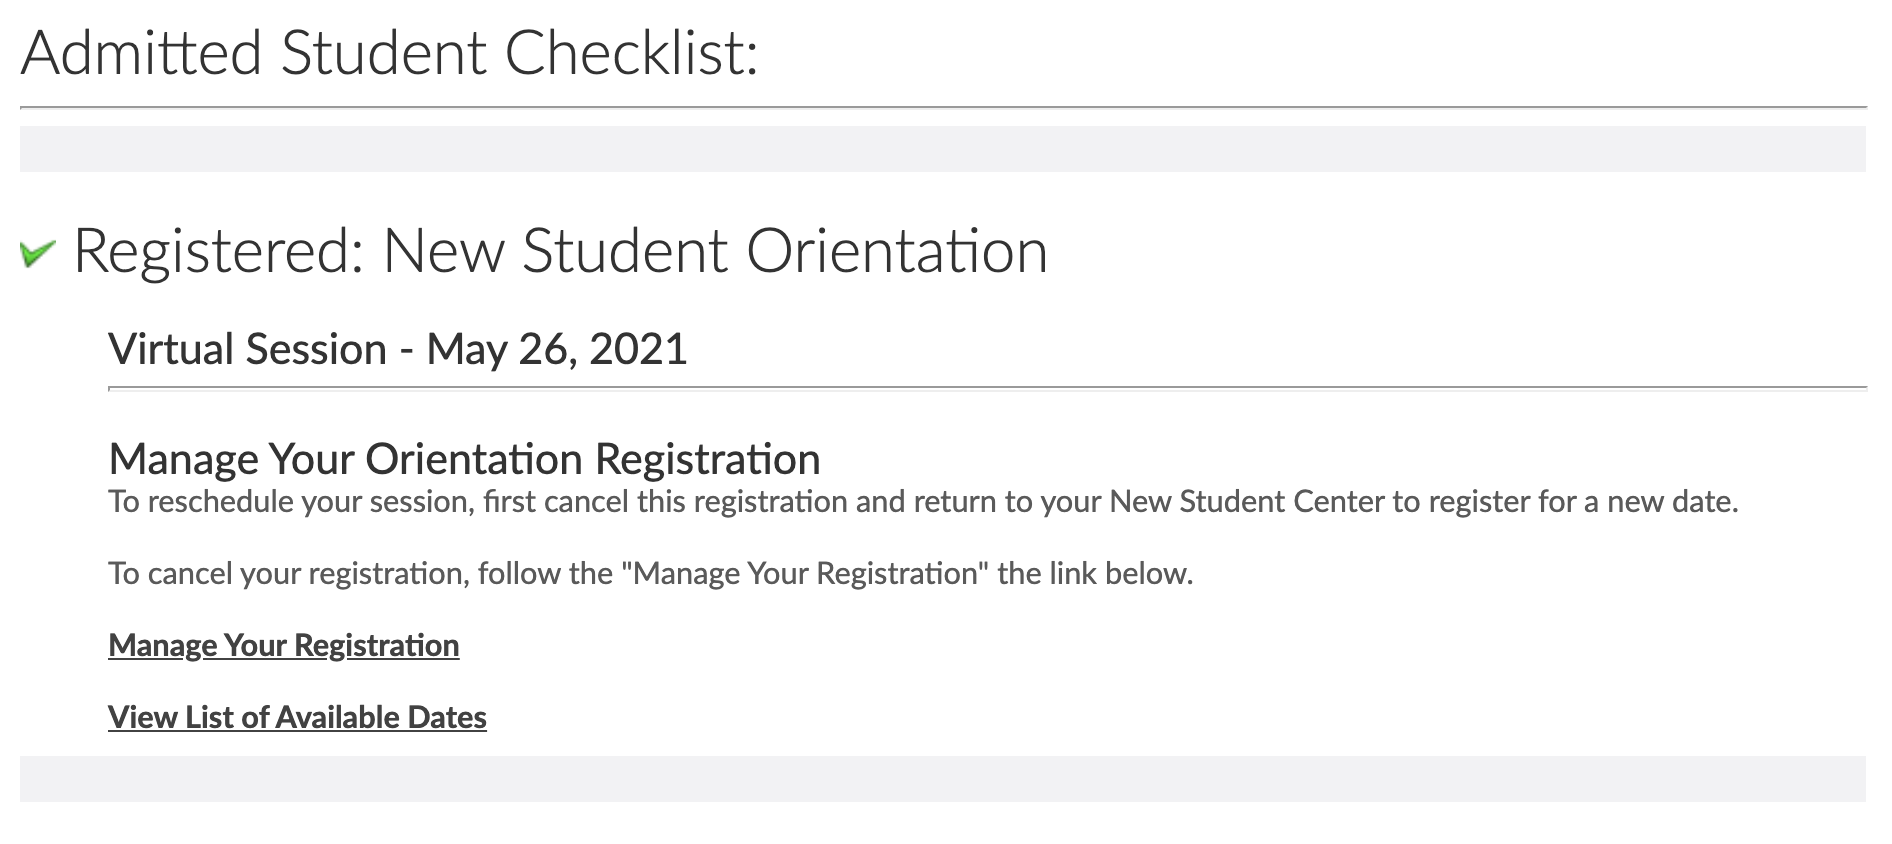 A screenshot of a New Student Center showing the orientation session the student is registered for, in their Admitted Student Checklist. Under the session information are links that say Manage Your Registration, and View List of Available Dates